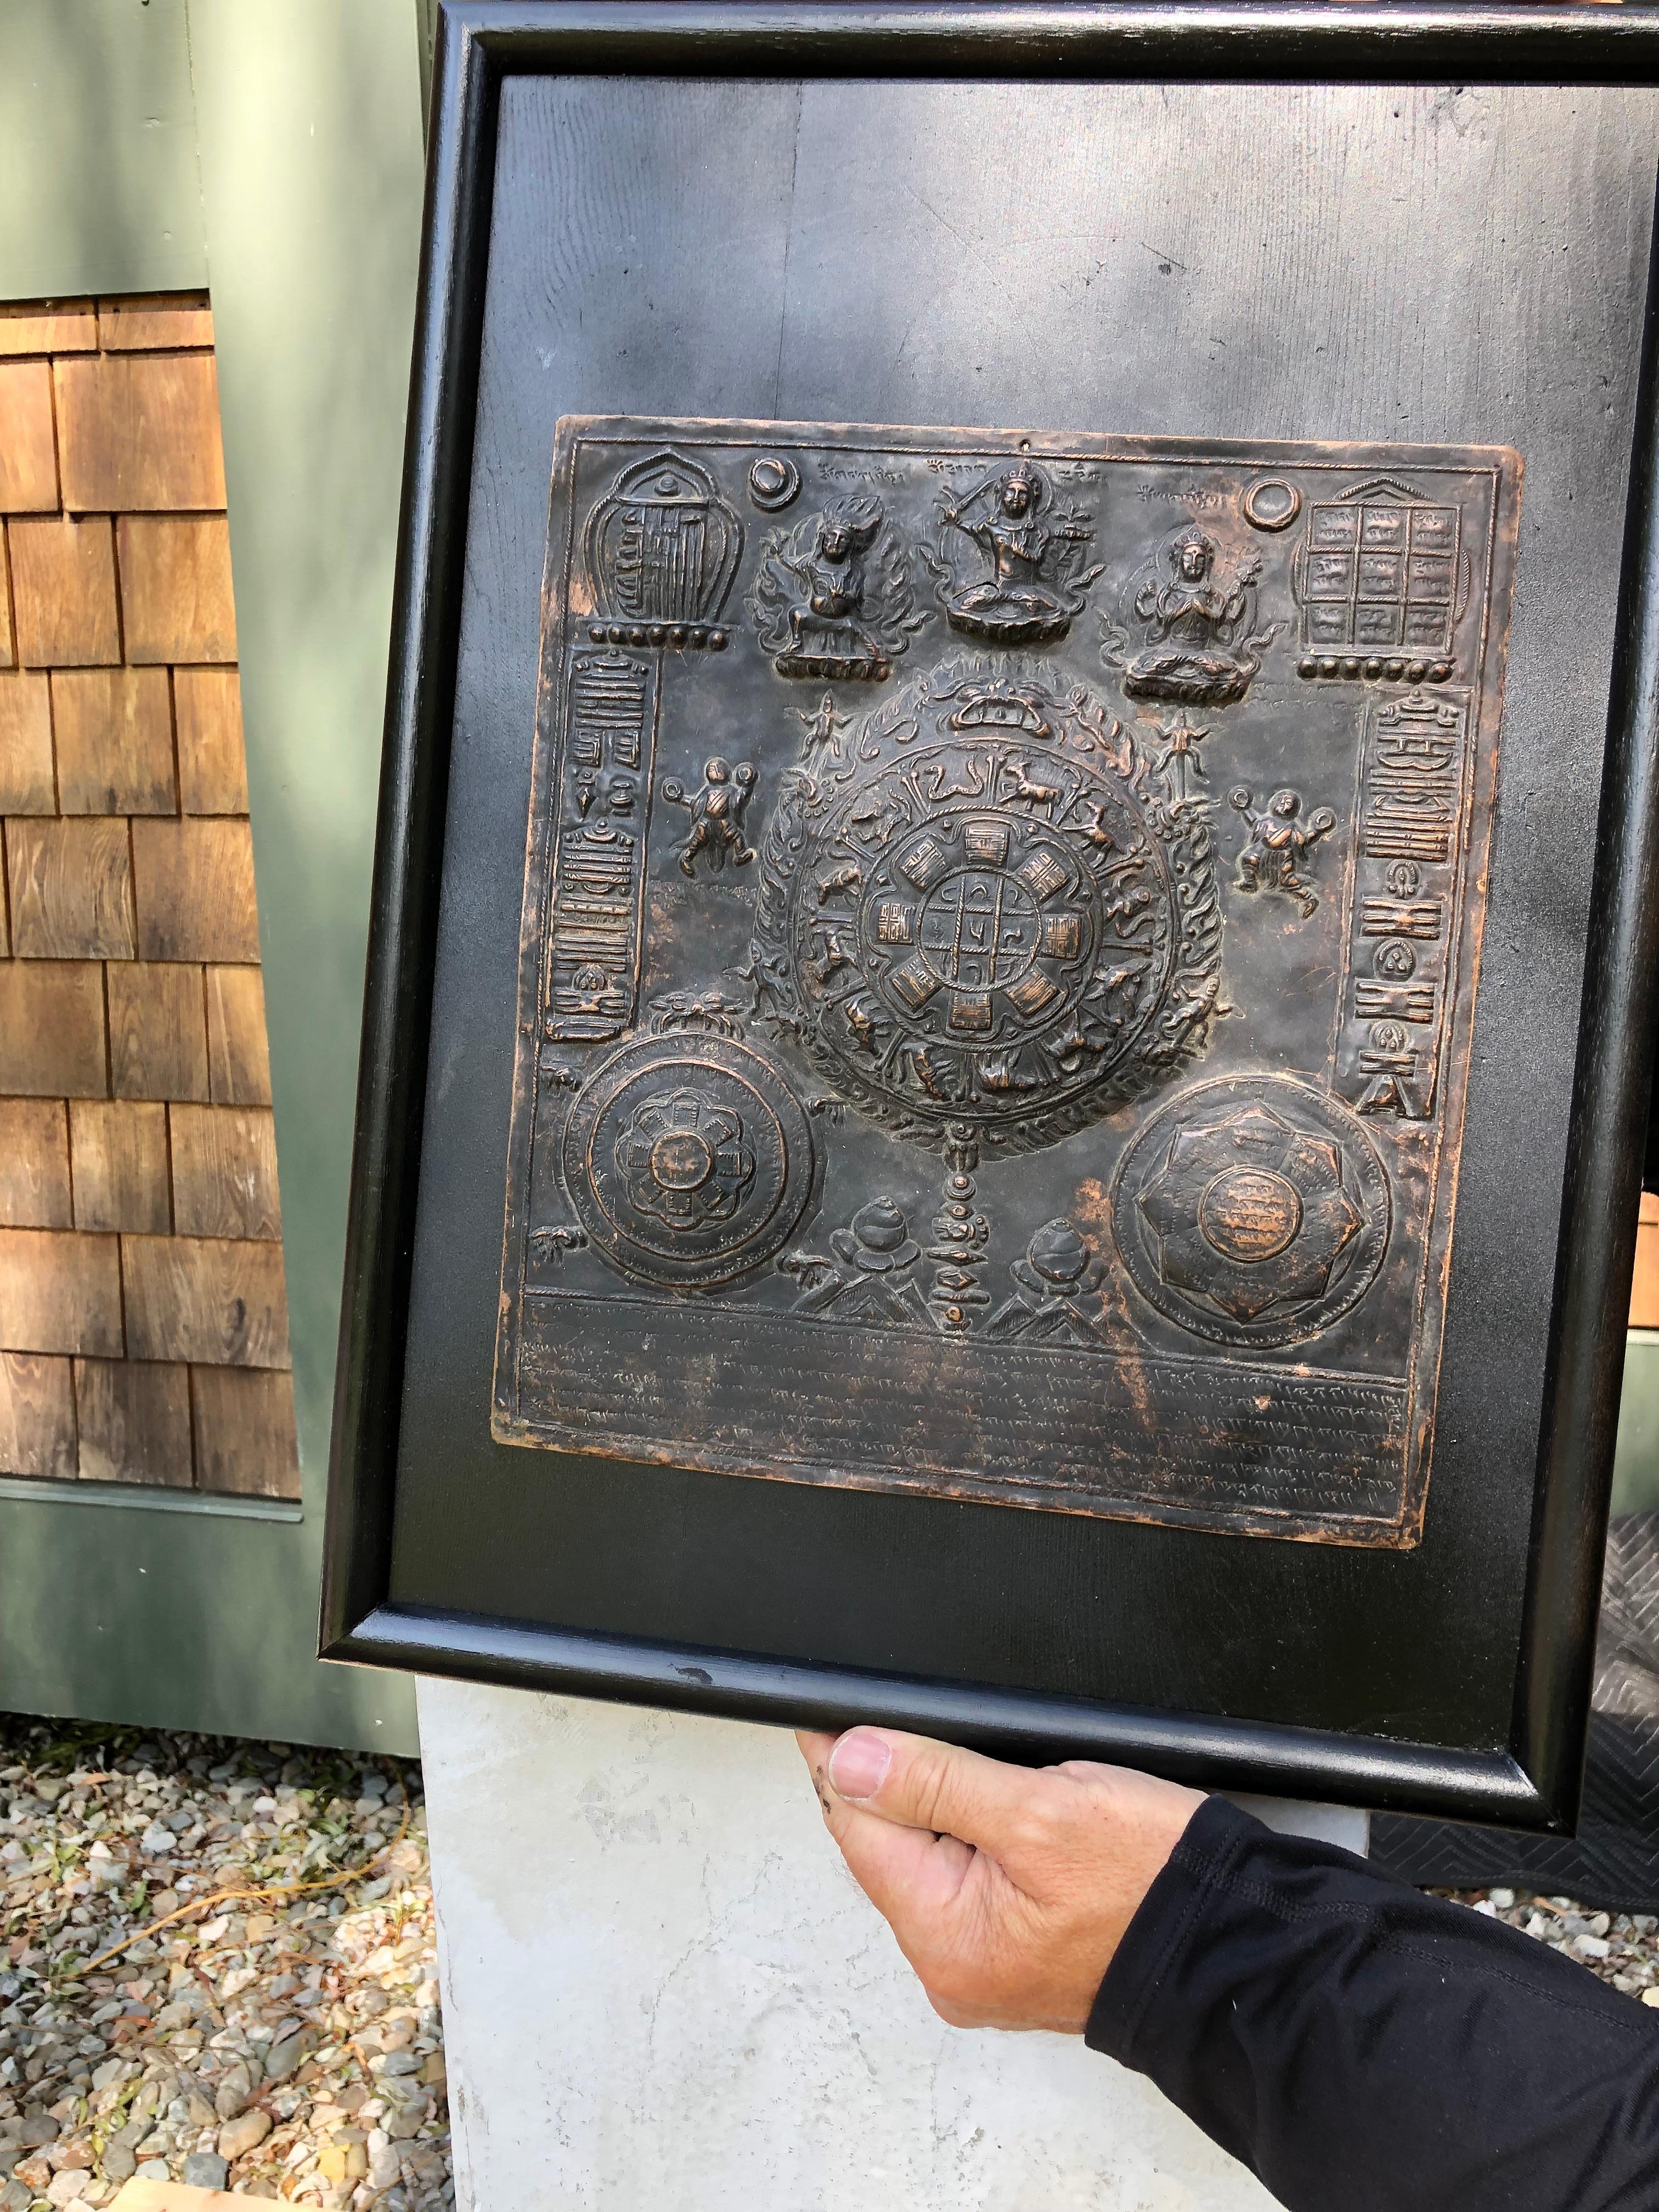 From our recent Japanese acquisitions

Coming from a private Japanese collection

A fine authentic old Tibetan copper plate 